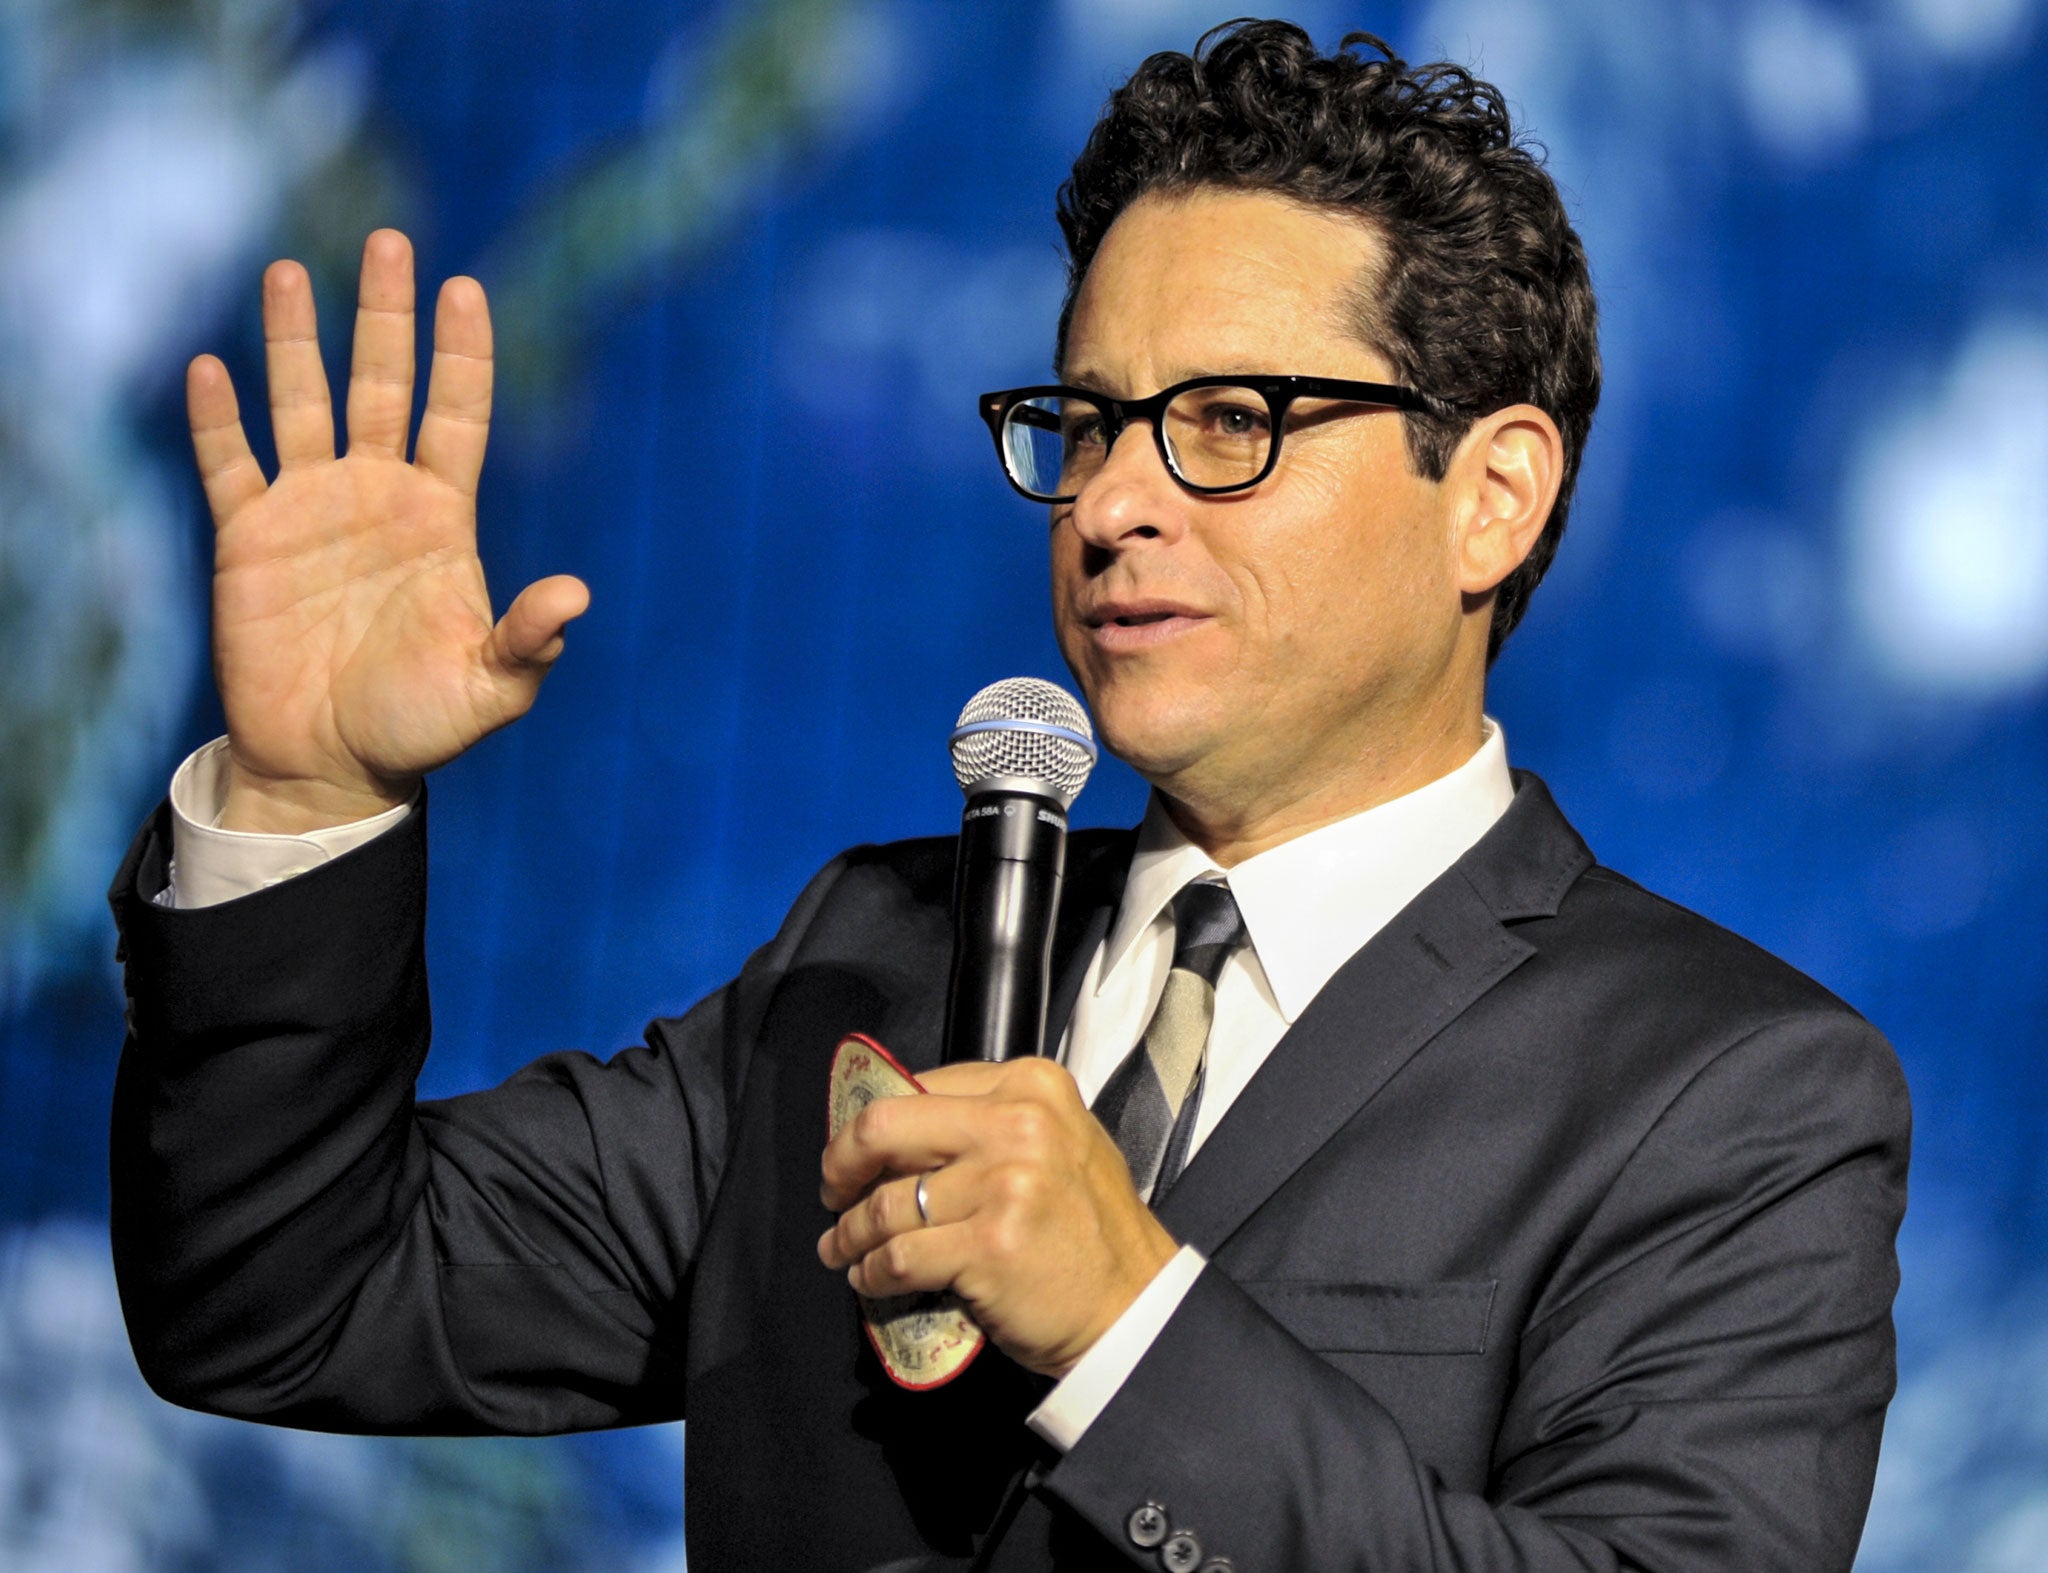 J.J. Abrams is set to release the the next Star Wars film in 2015